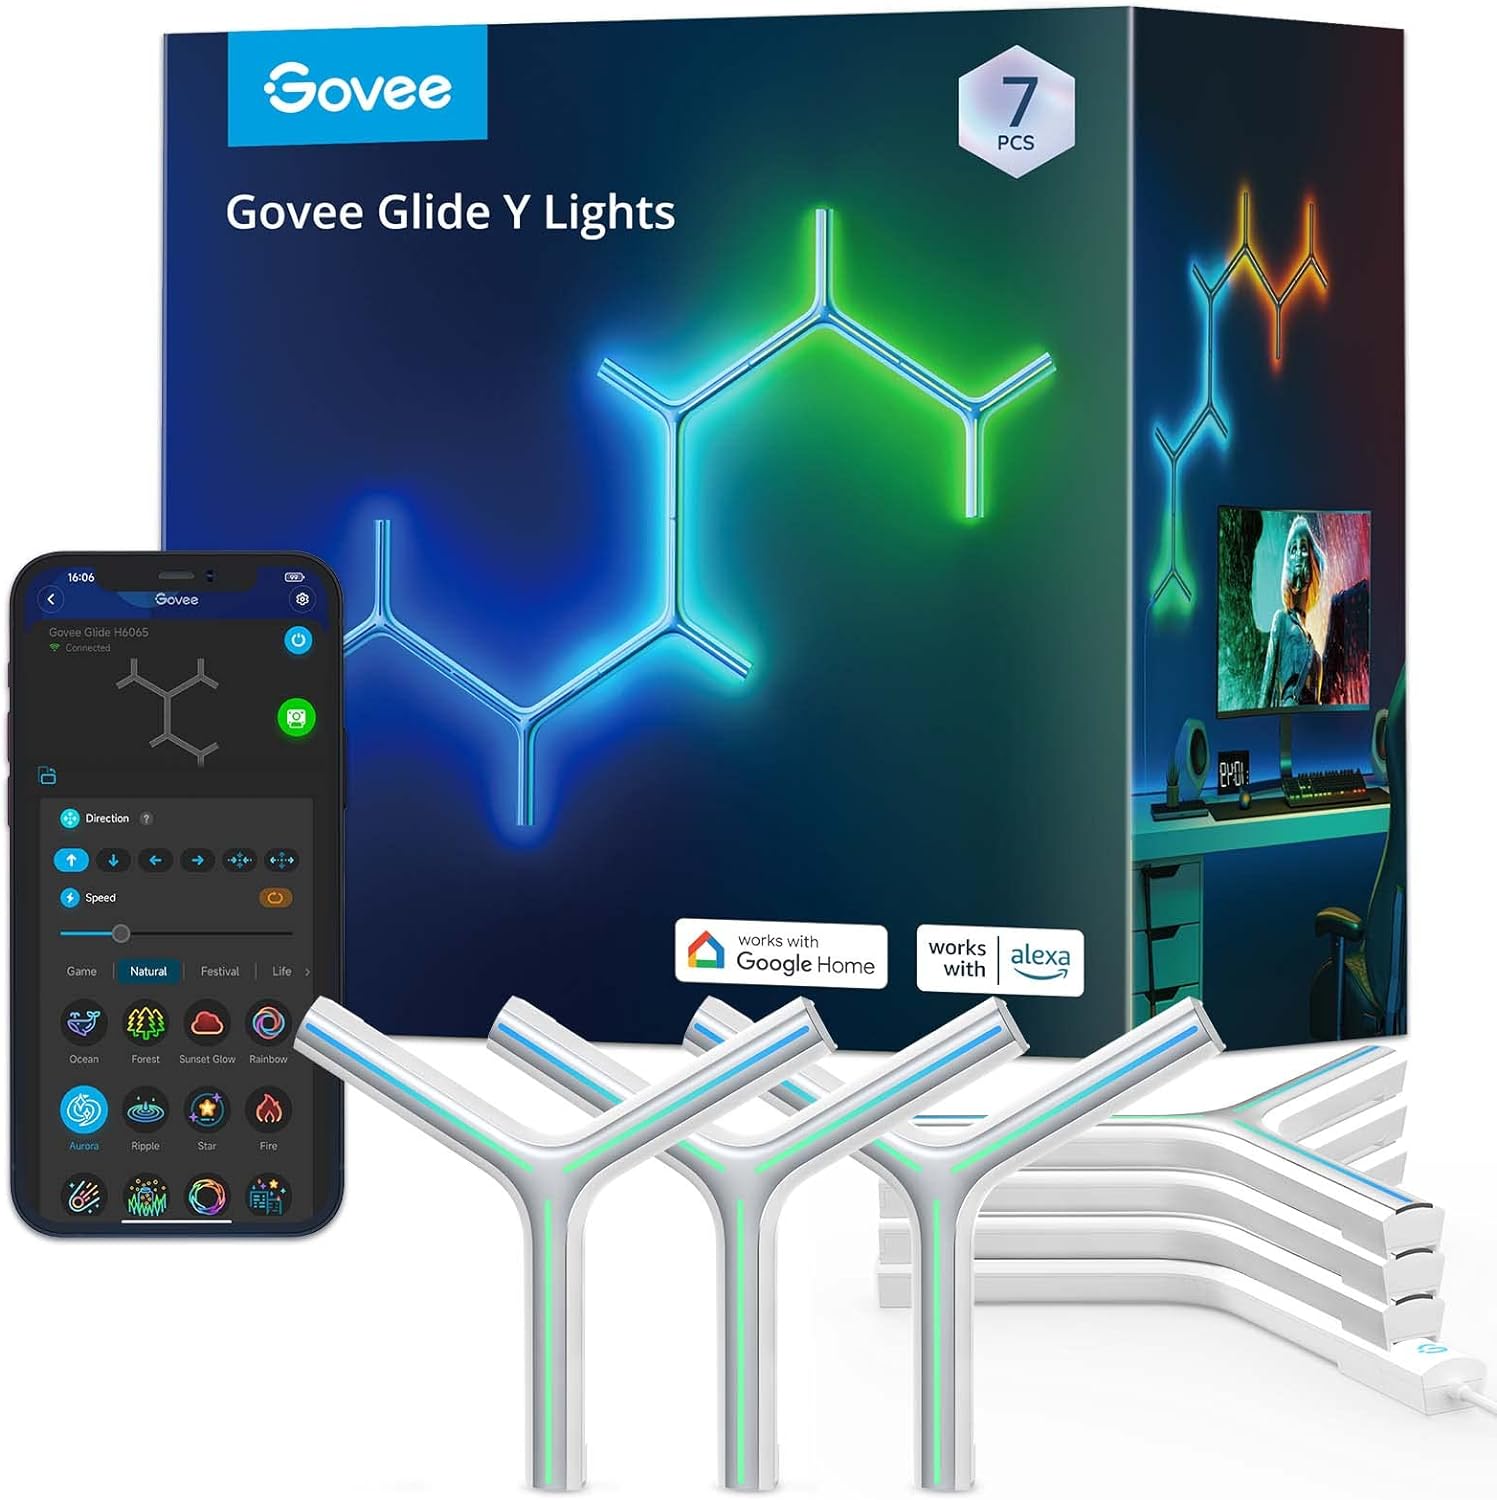 Govee RGBIC LED Glide Y Lights Smart WiFi Wall Lights with Music Sync, Remote Control, 40+ Scene Modes for Living Room, Bedroom, Game Room, 7 Pack